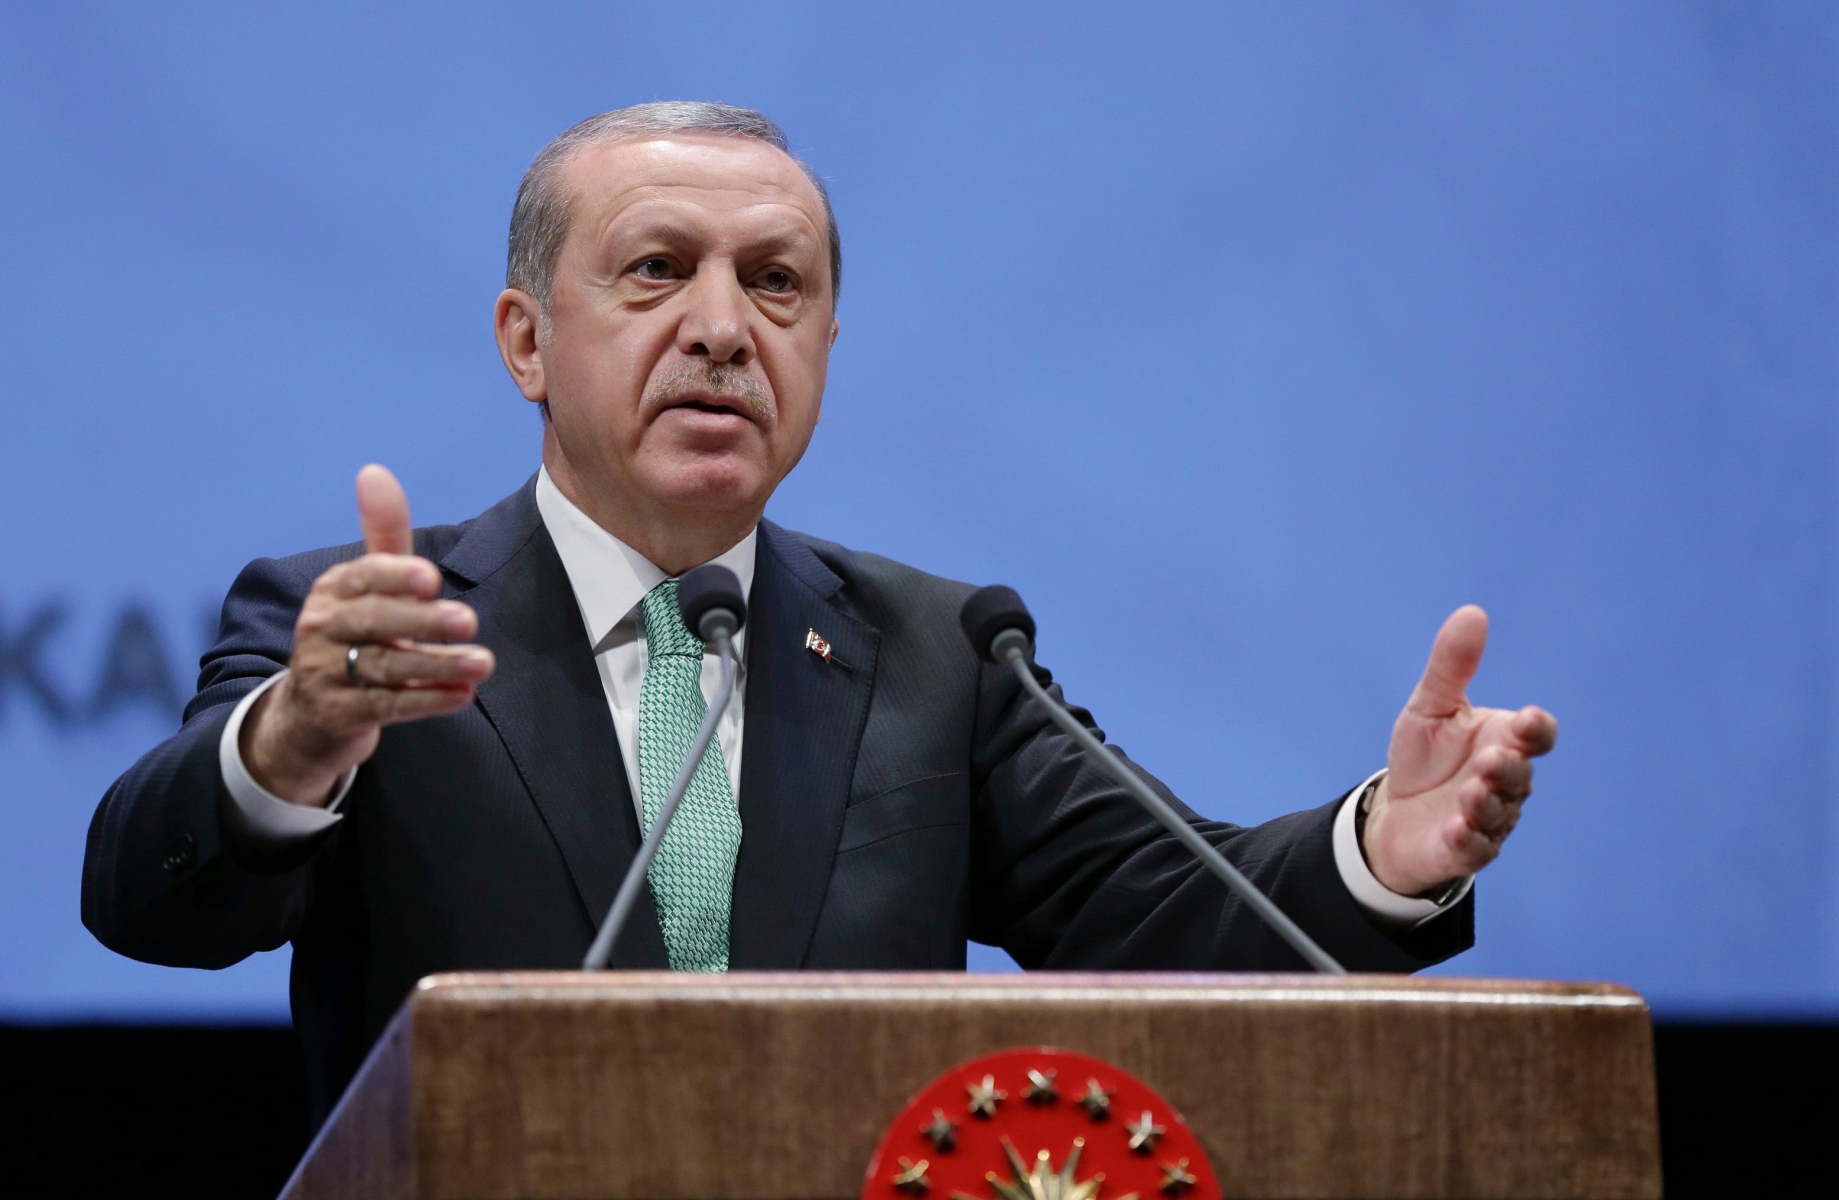 Turkey's President Recep Tayyip Erdogan addresses a meeting at his palace in Ankara, Turkey, Thursday, Nov. 3, 2016. Erdogan has harshly criticized Germany, accusing it of supporting terrorism and slamming comments suggesting Berlin may not extradite suspects wanted by Turkey if it considers the case is politically motivated. (Murat Cetinmuhurdar/Pool photo via AP) Turkey Germany